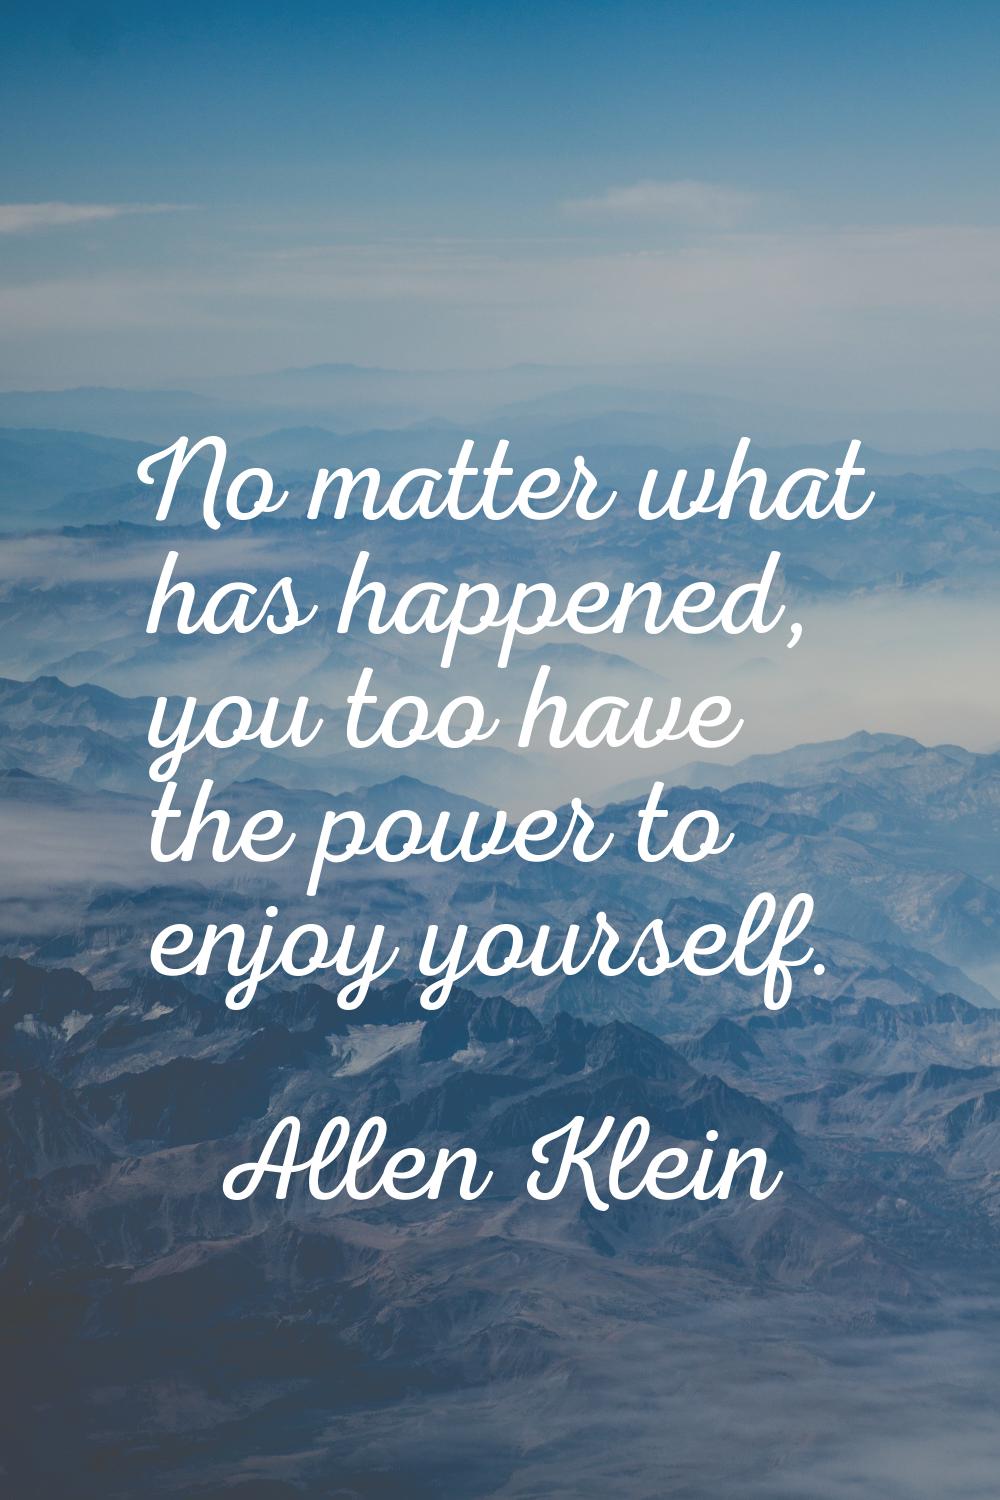 No matter what has happened, you too have the power to enjoy yourself.